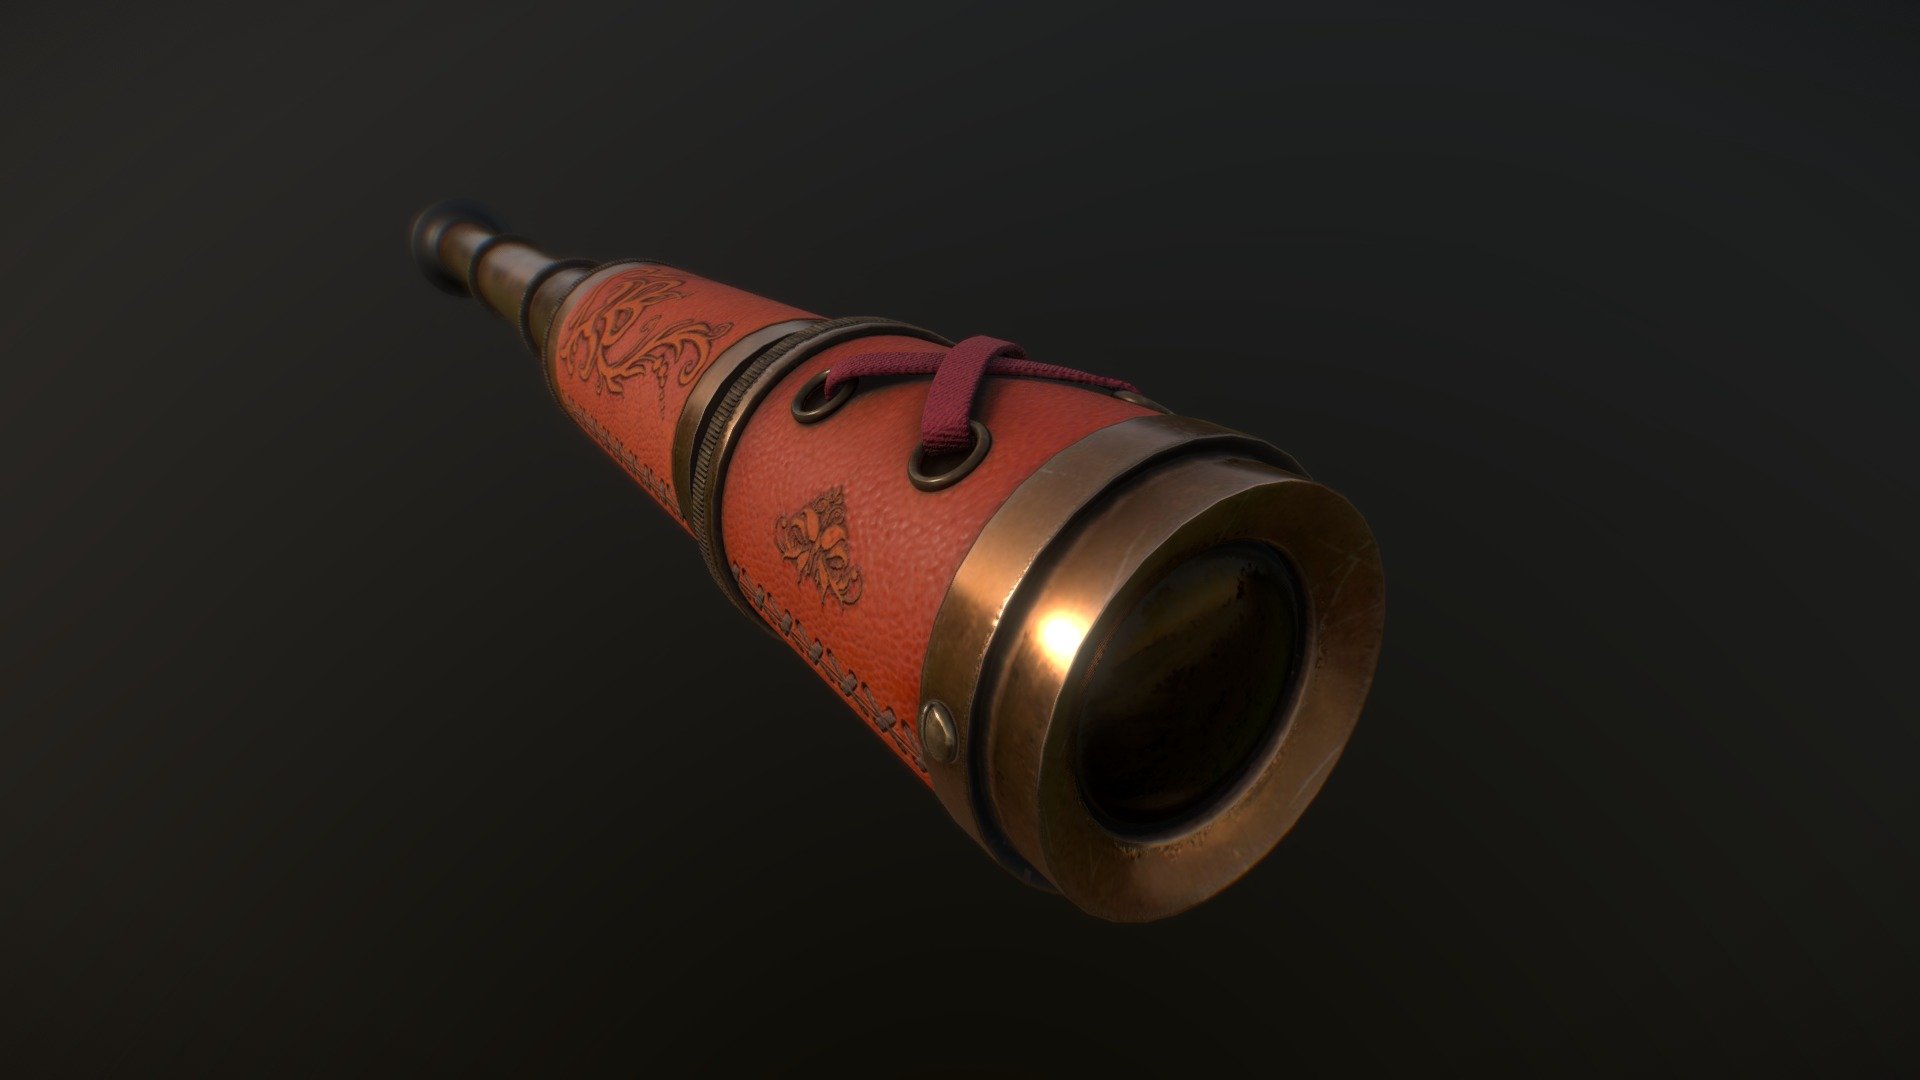 Hey everyone!

I'm back with another amazing and custom looking model. This is a Pirate's Spyglass with a few customisations of my own and a stunning look. The model has been well prepared for whatever kind of software imports.

I hope ya'll love and enjoy this model! - Pirate Spyglass - Buy Royalty Free 3D model by TheNerdForum (@RidwanManda) 3d model